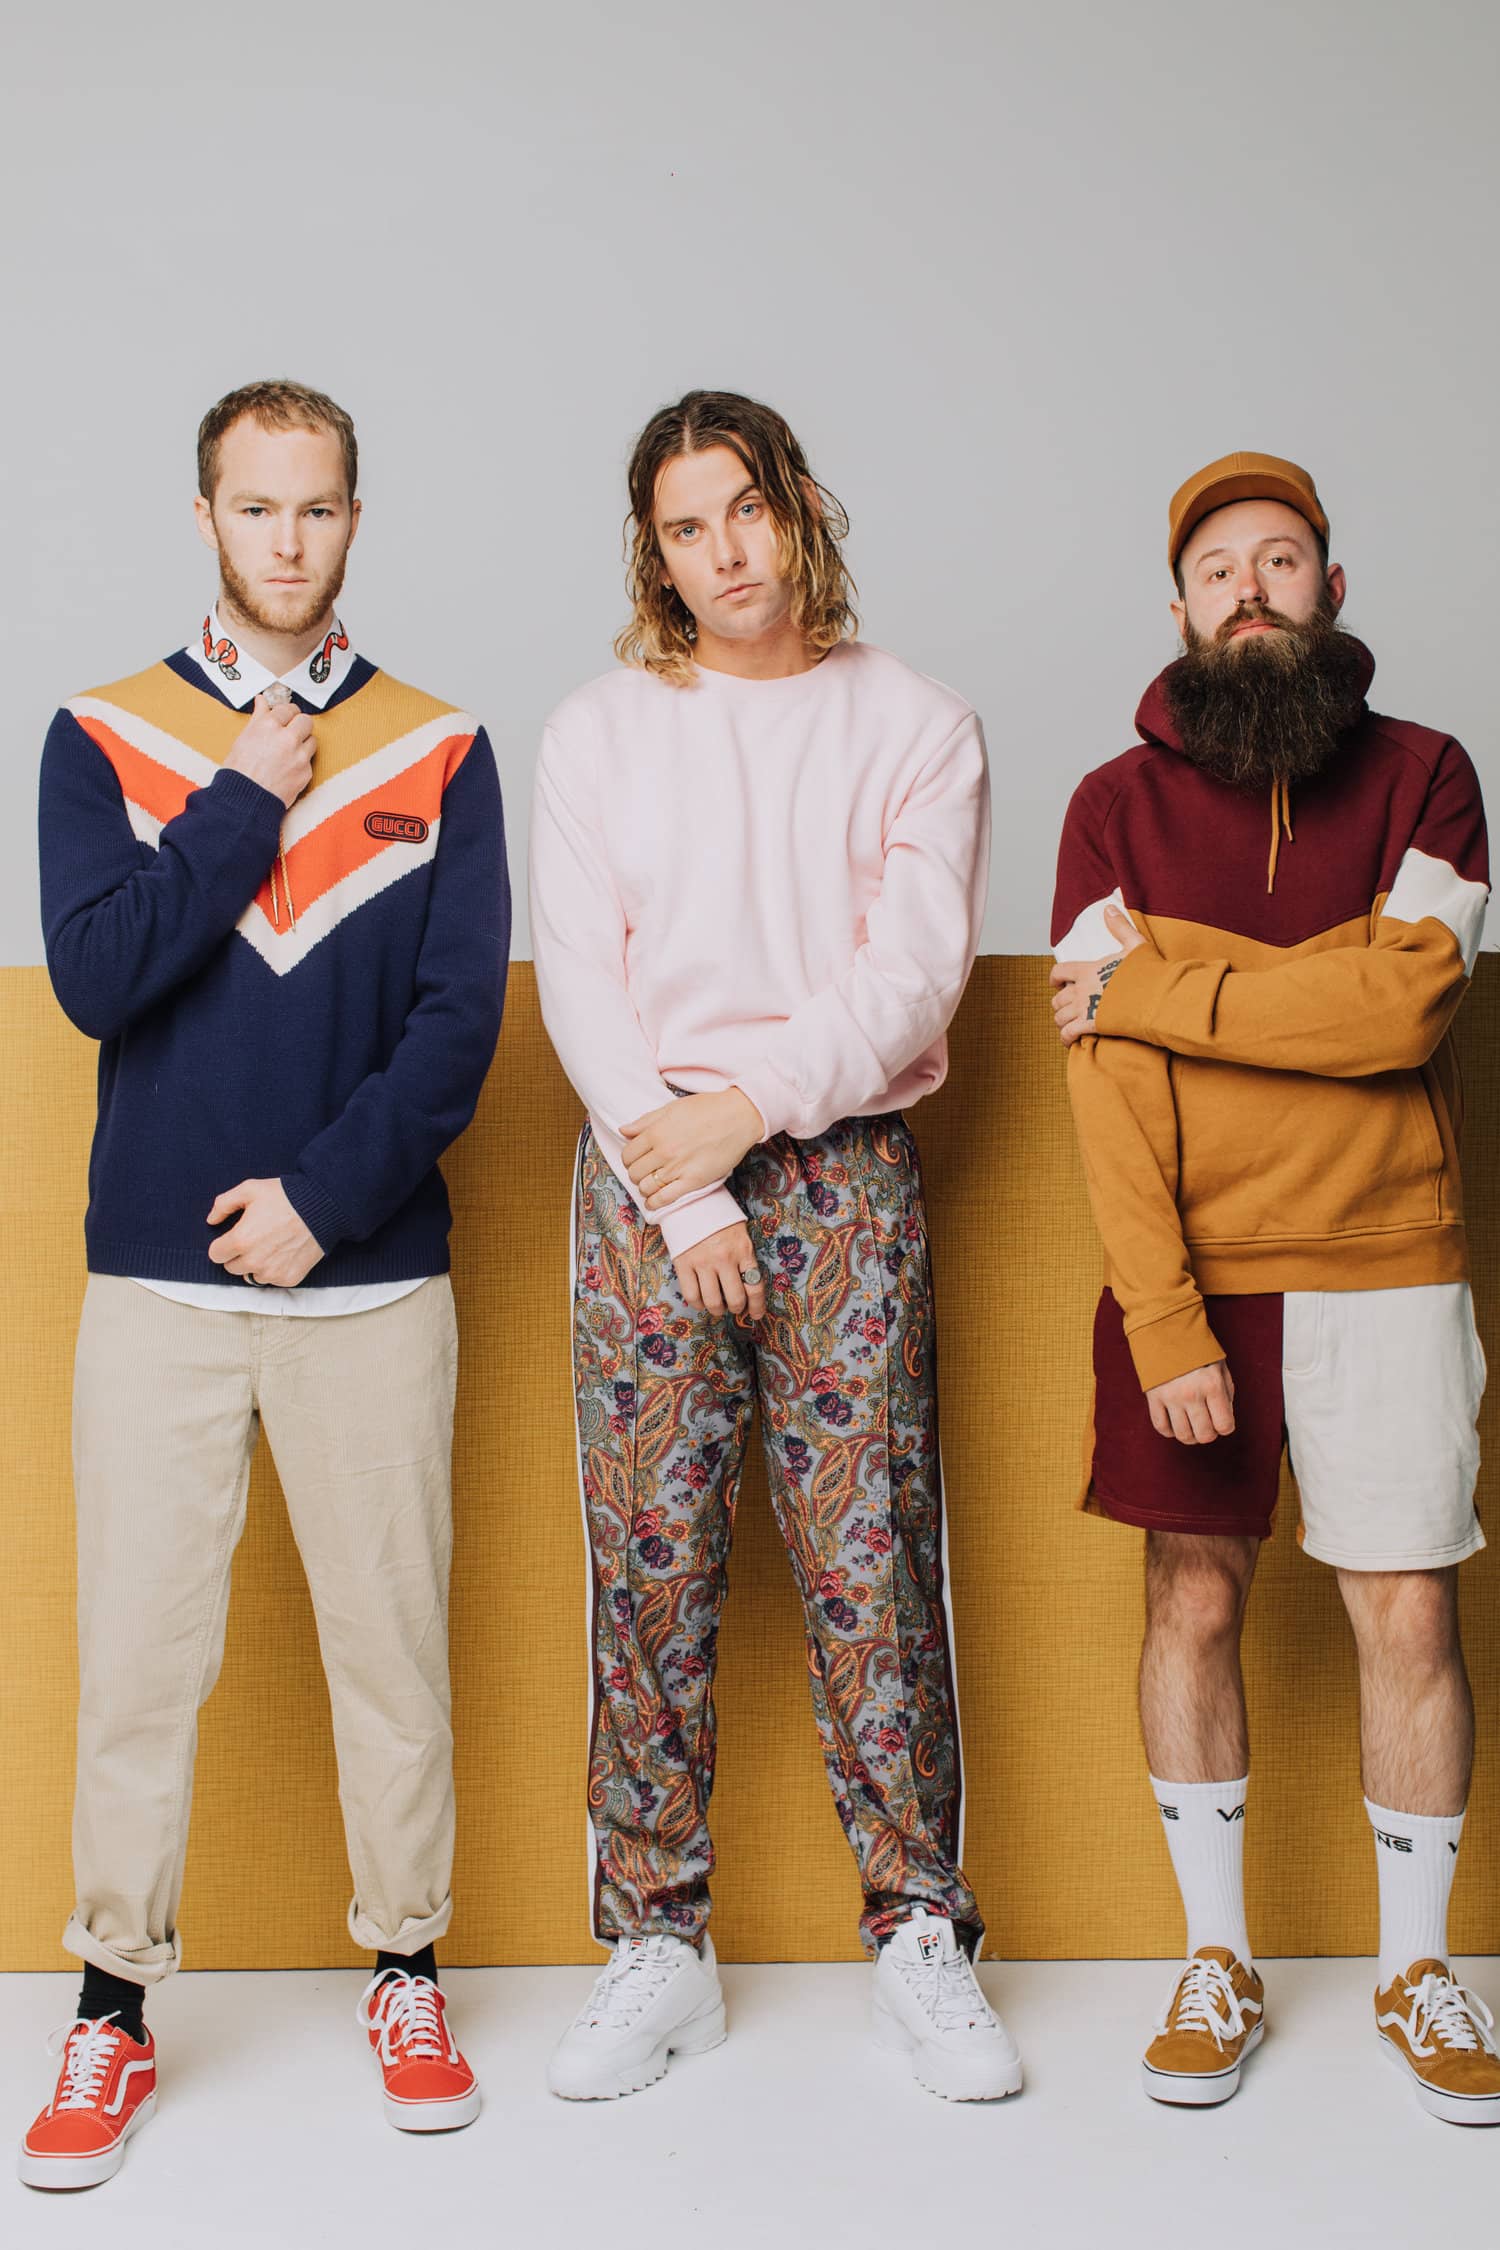 Judah and the Lion band image